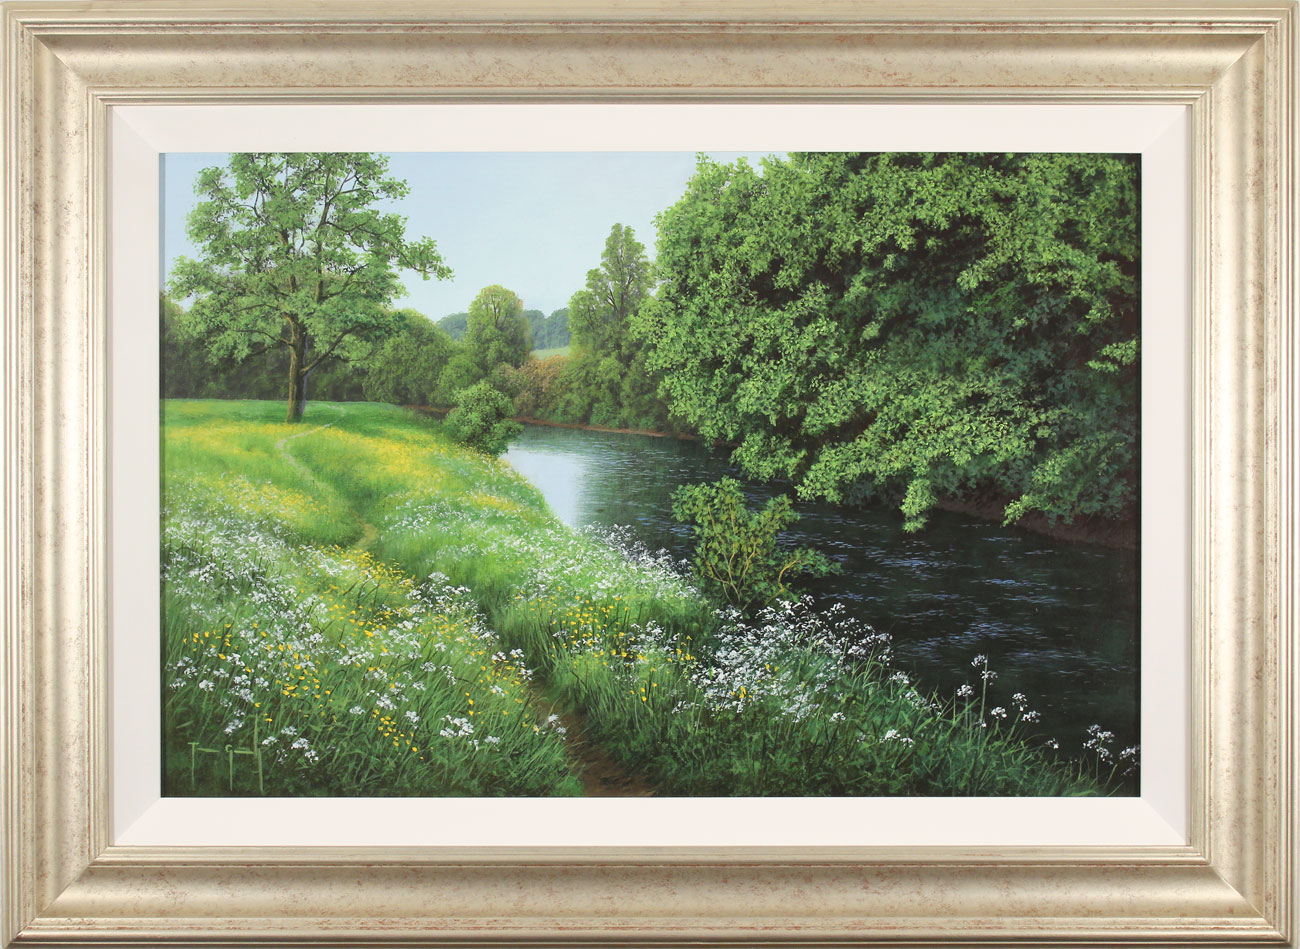 Terry Grundy, Original oil painting on panel, Midsummer by the River. Click to enlarge